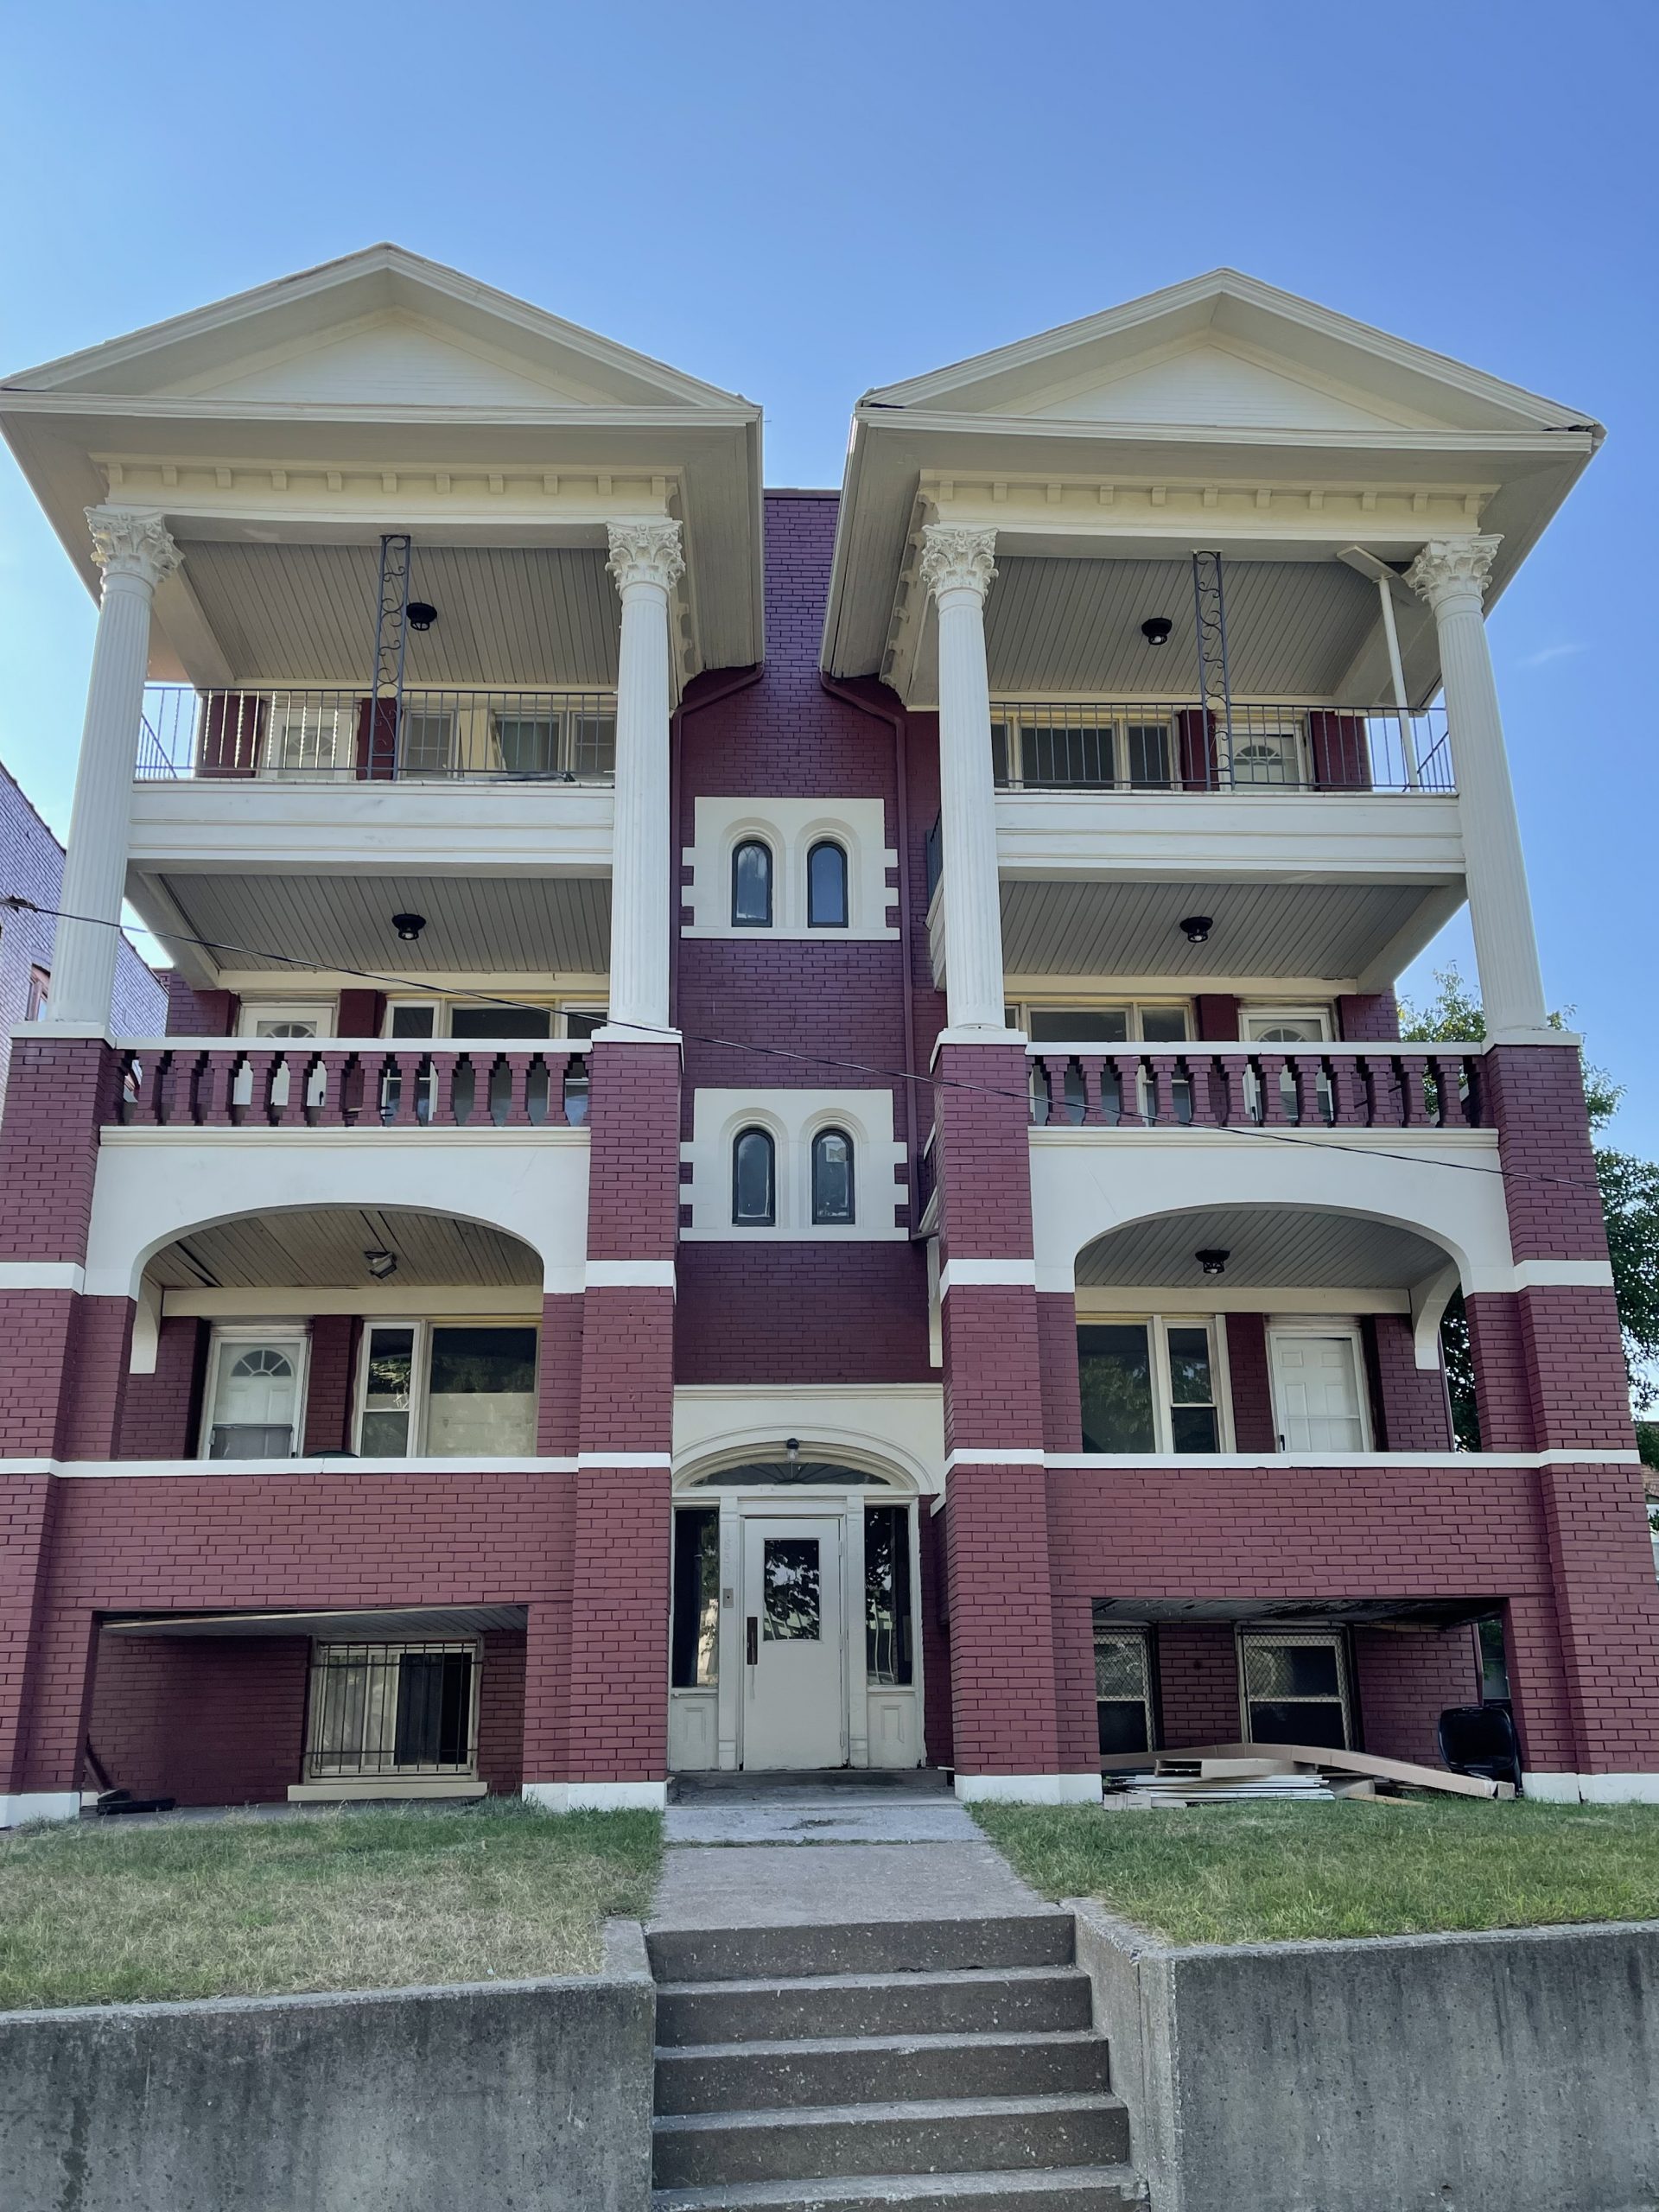 twin tower apartments front view after painting